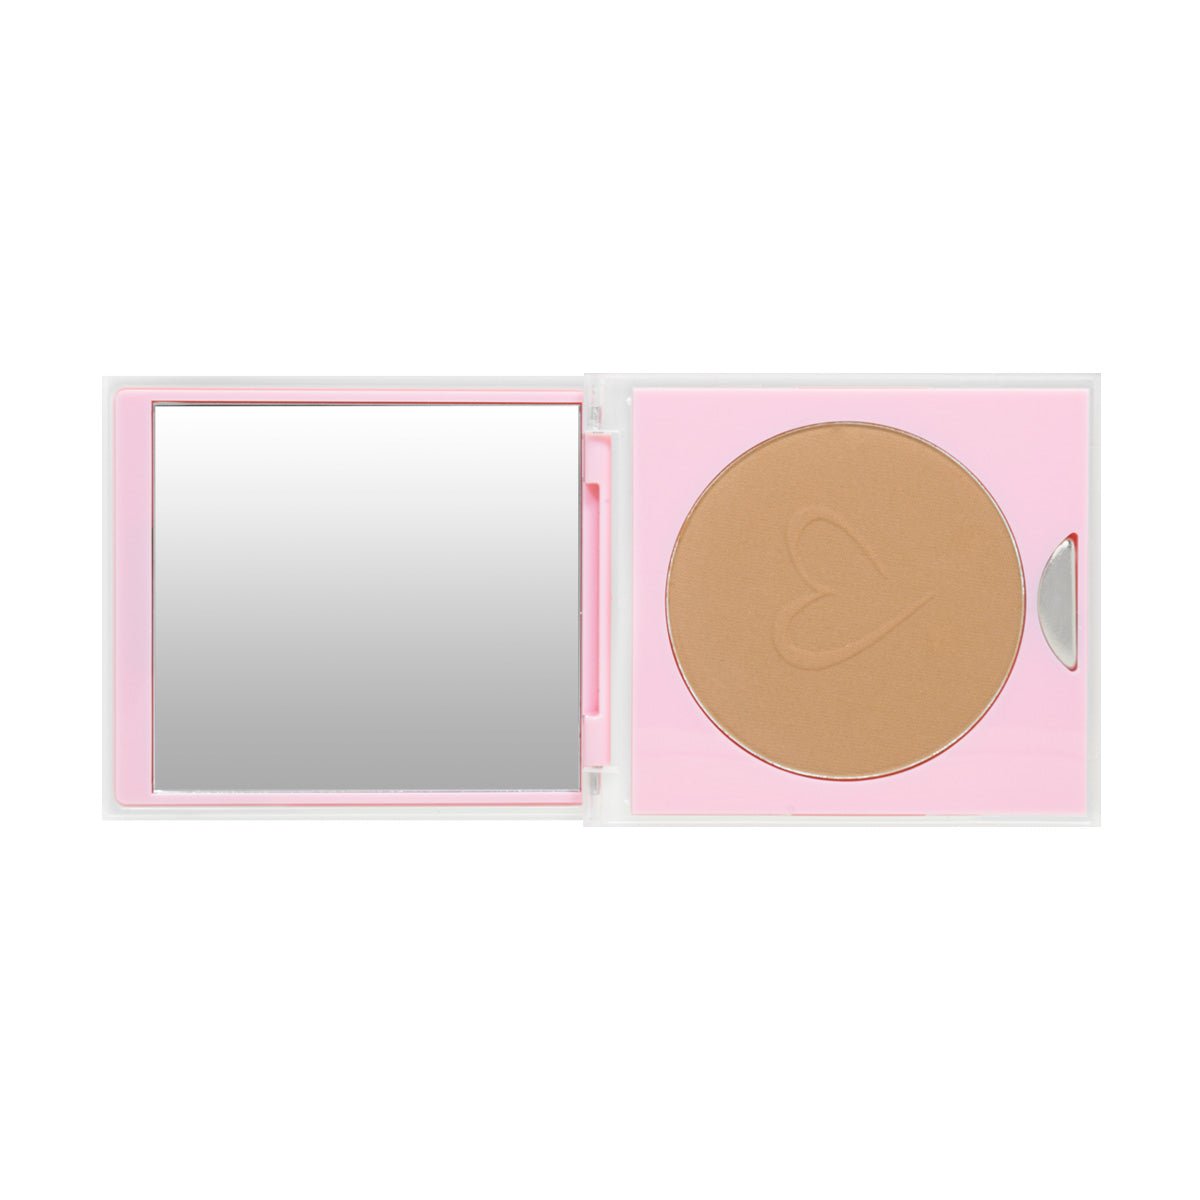 Duo Rubor Líquido Barely Blushing - Peaches of my Heart – Beauty Creations  Colombia